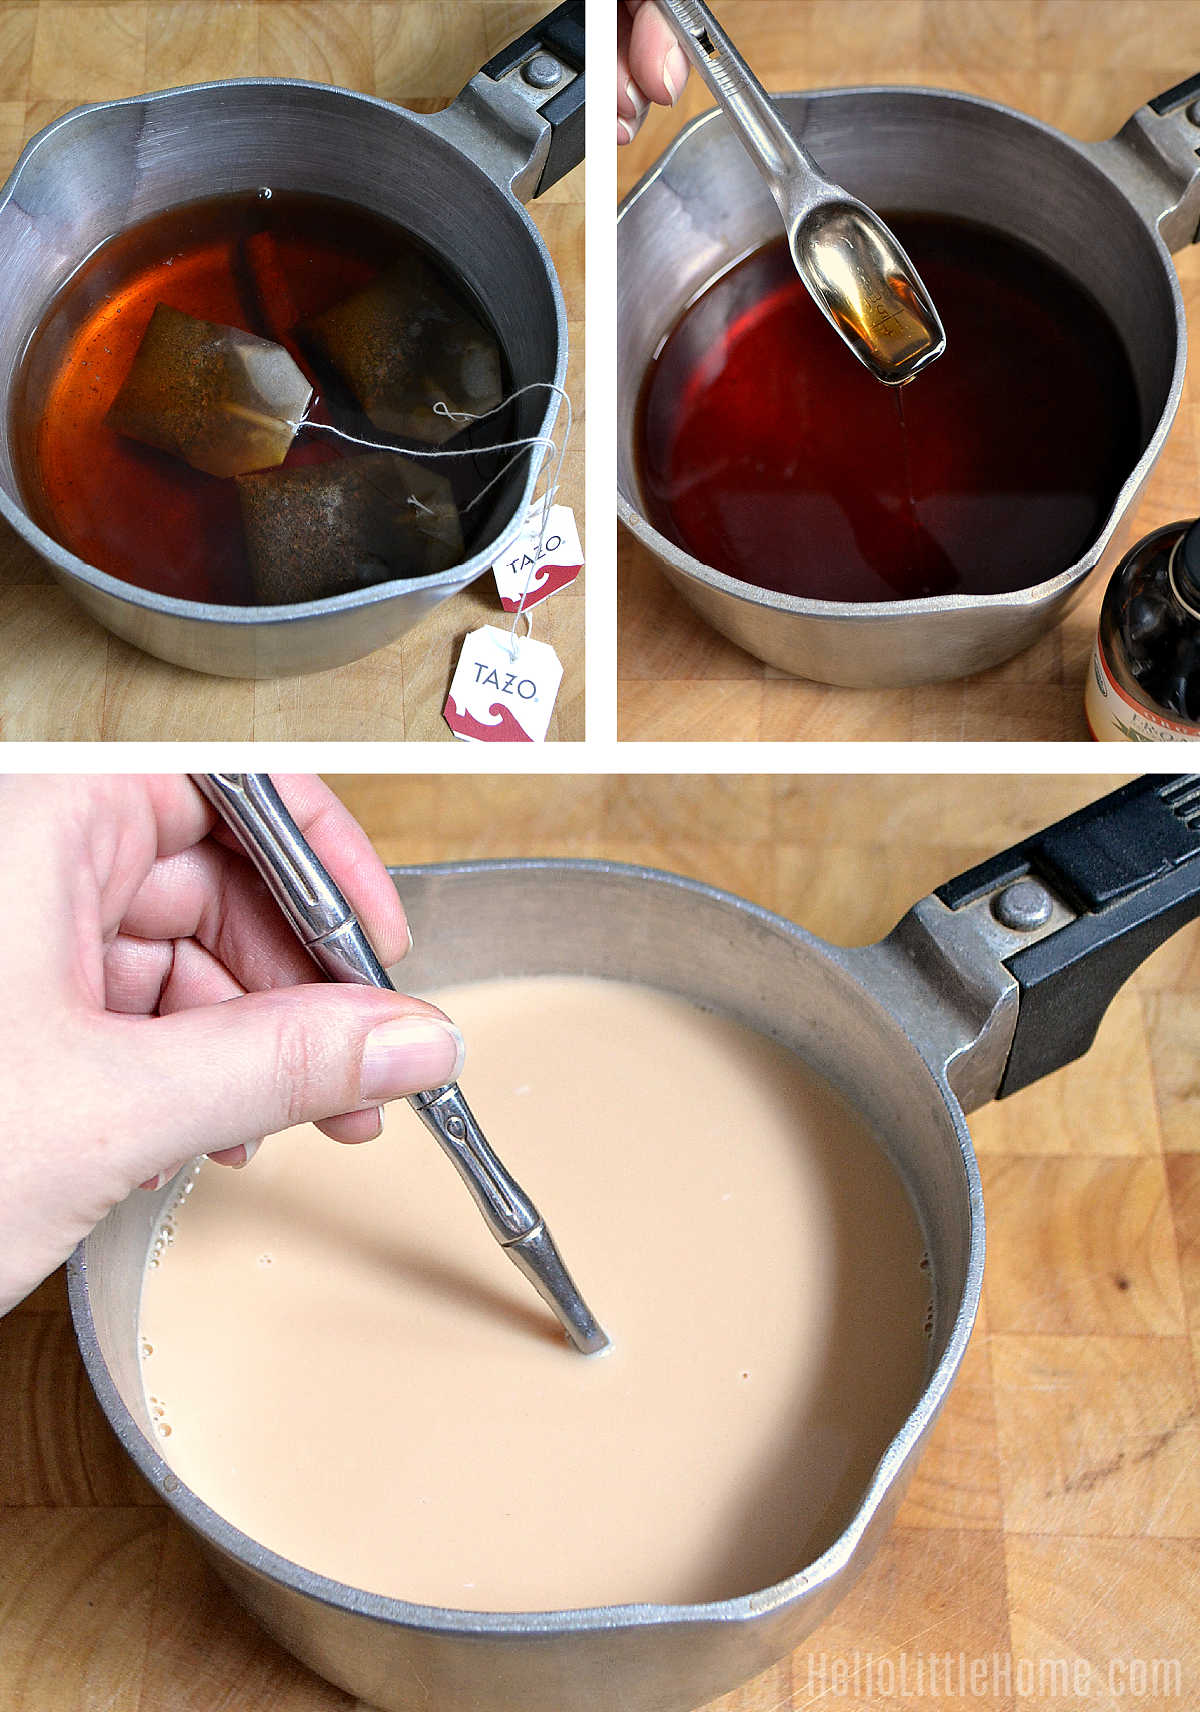 A photo collage showing how to make cinnamon milk tea step-by-step.